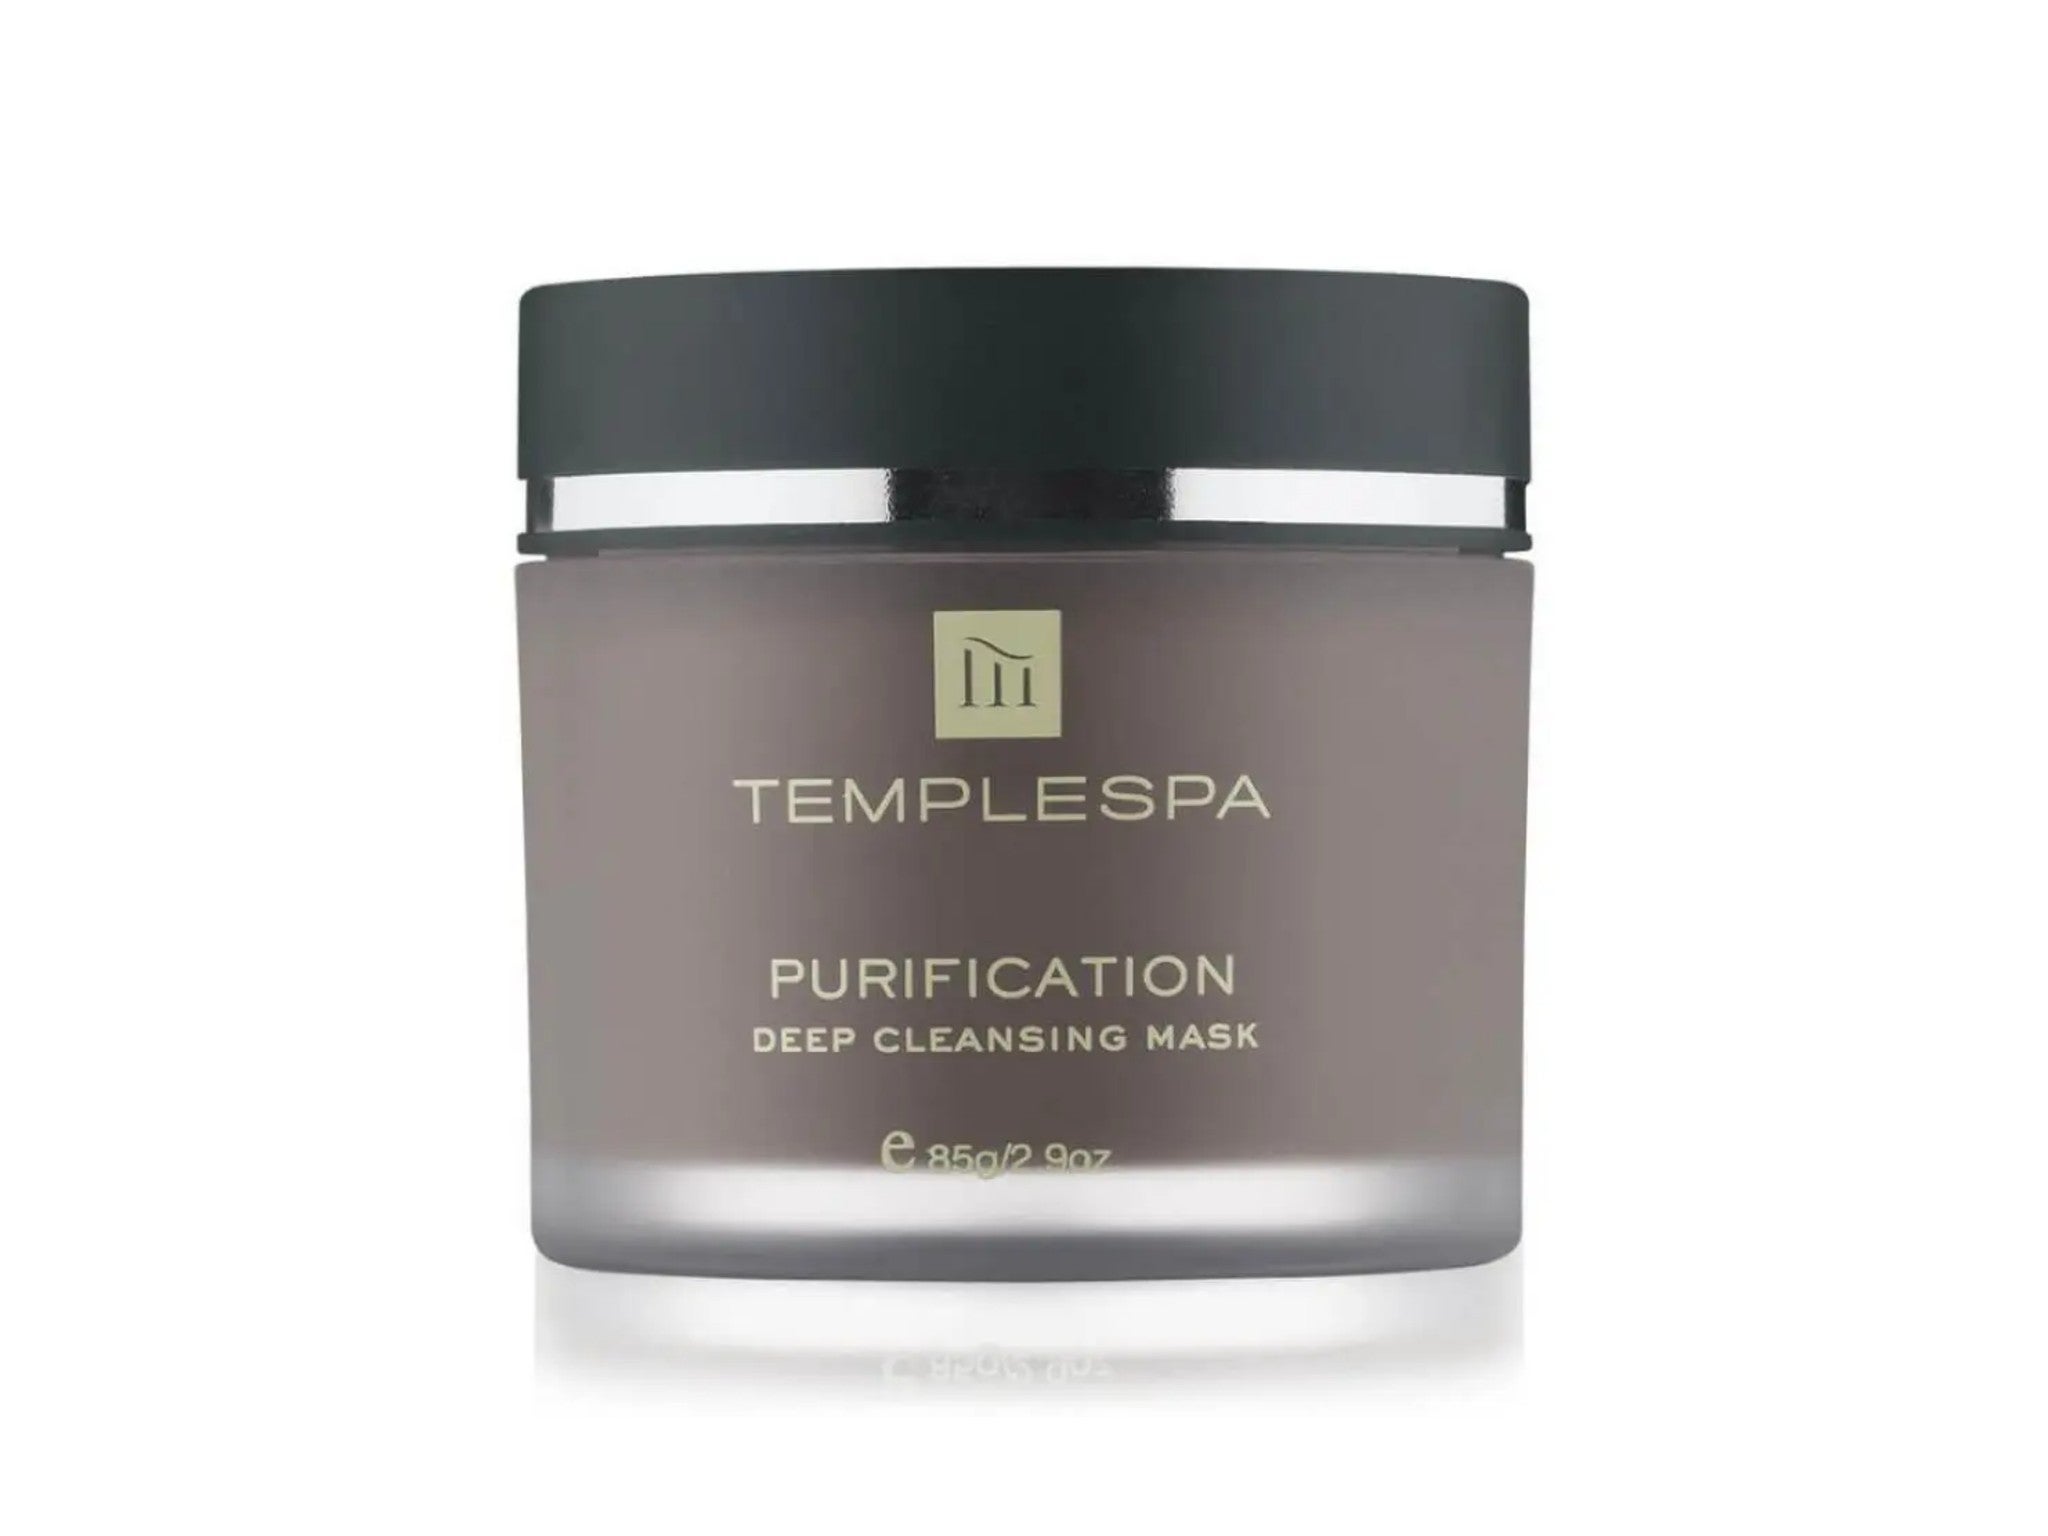 Temple Spa purification deep cleansing mask indybest.jpeg